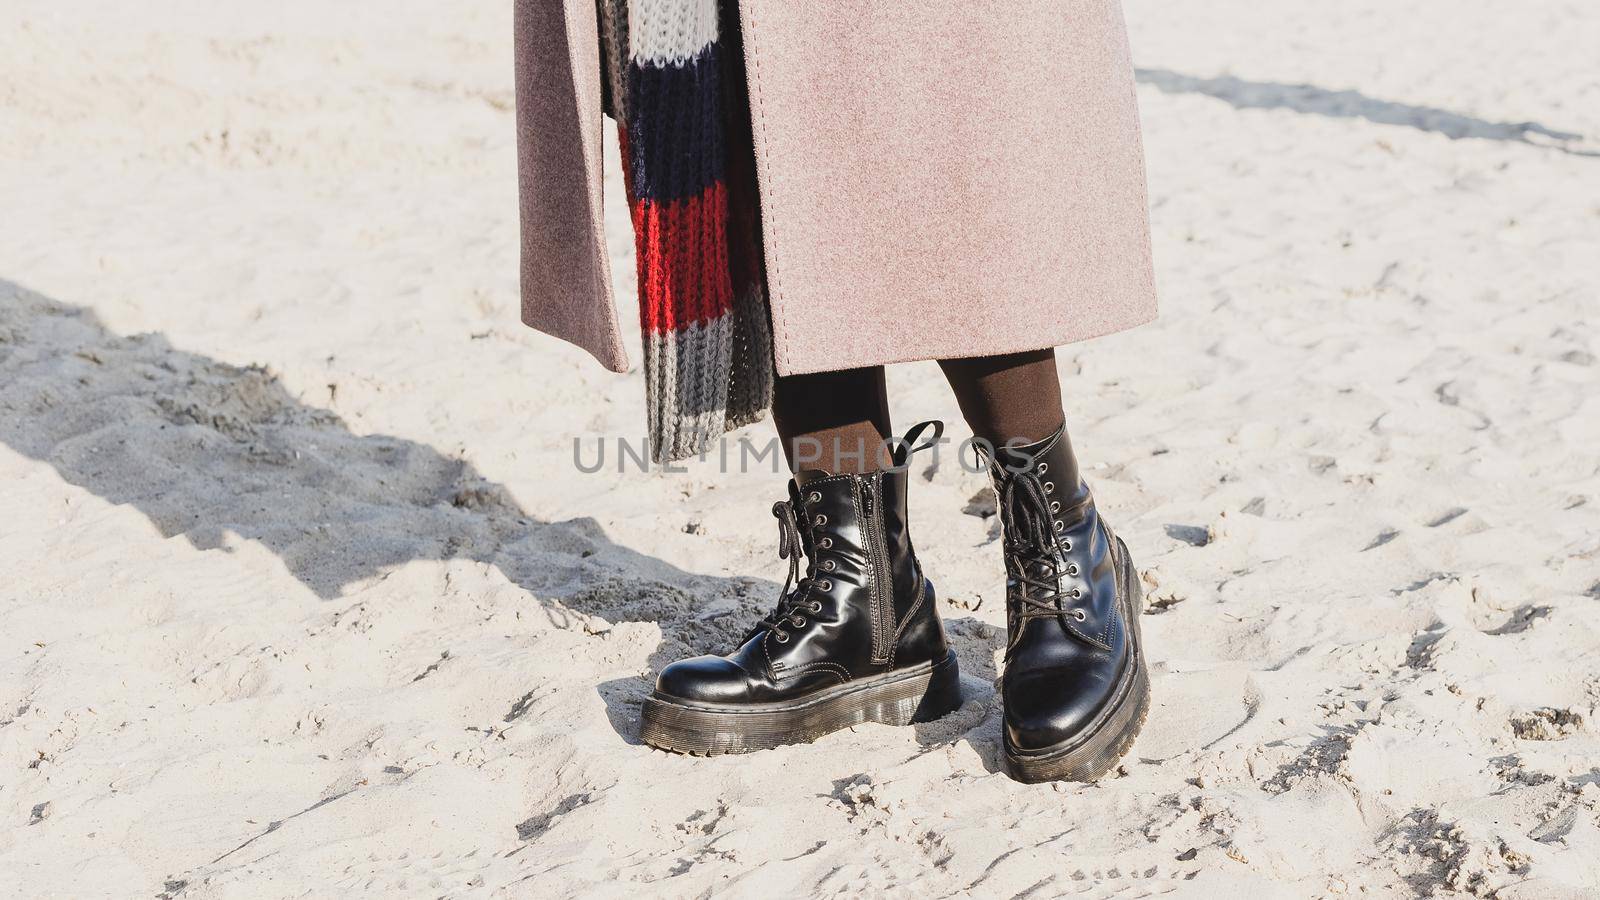 Stylish black smooth leather ankle boots in outdoor on the sand beach. Cold season outfit